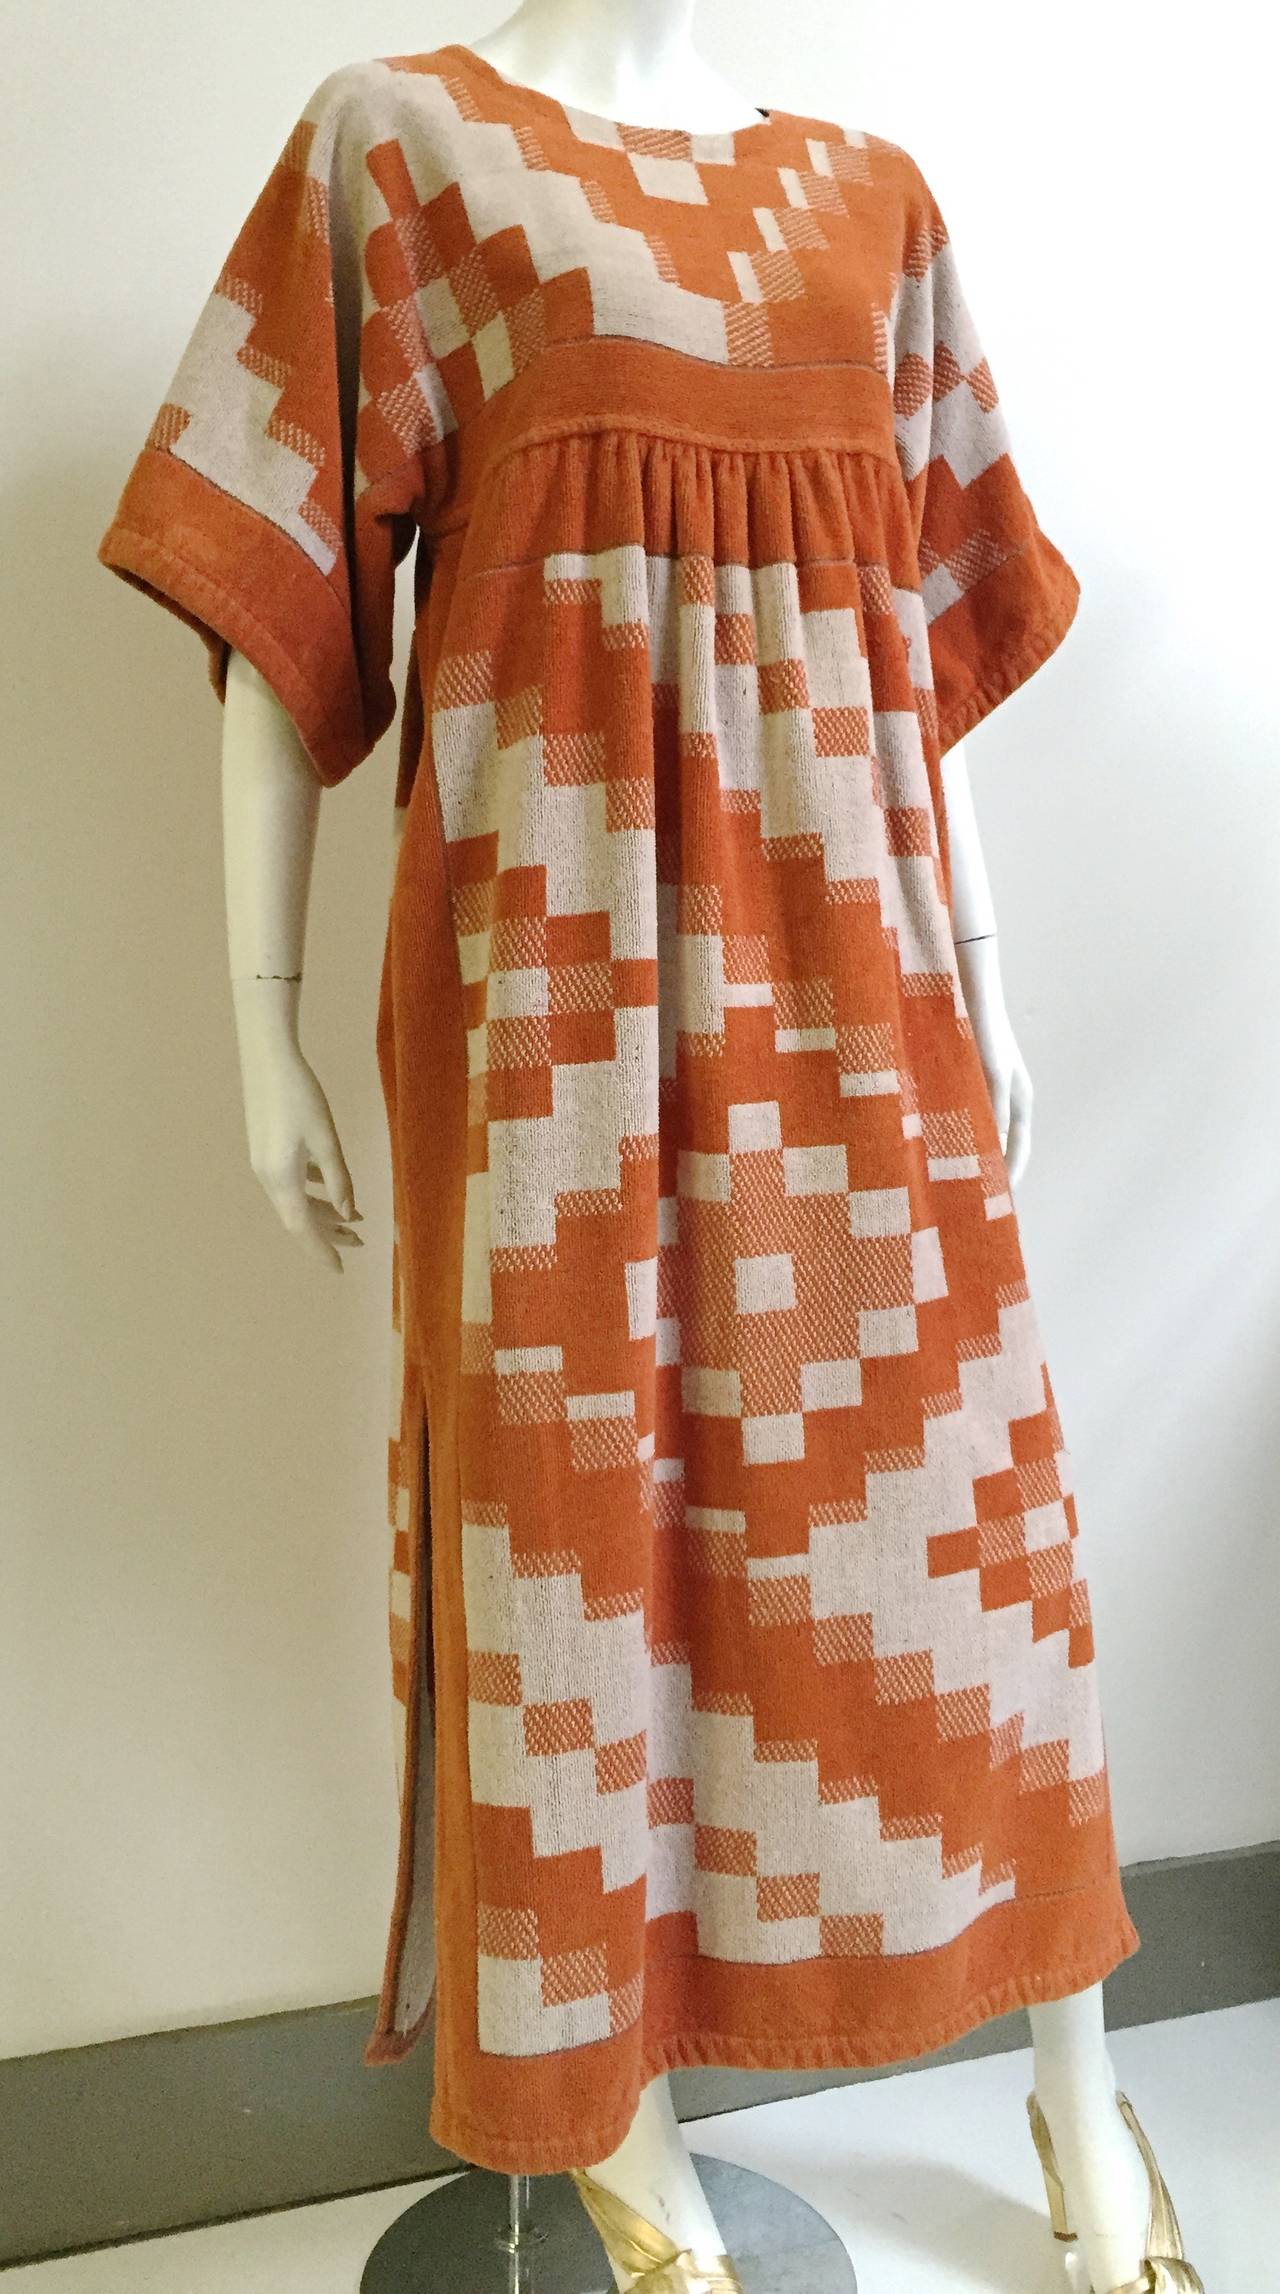 Yves Saint Laurent cotton terry cloth caftan with abstract block pattern has pockets and is a size medium ( fits 4-6-8).  Perfect for lounging at the pool or beach side.
Measurements are:
38